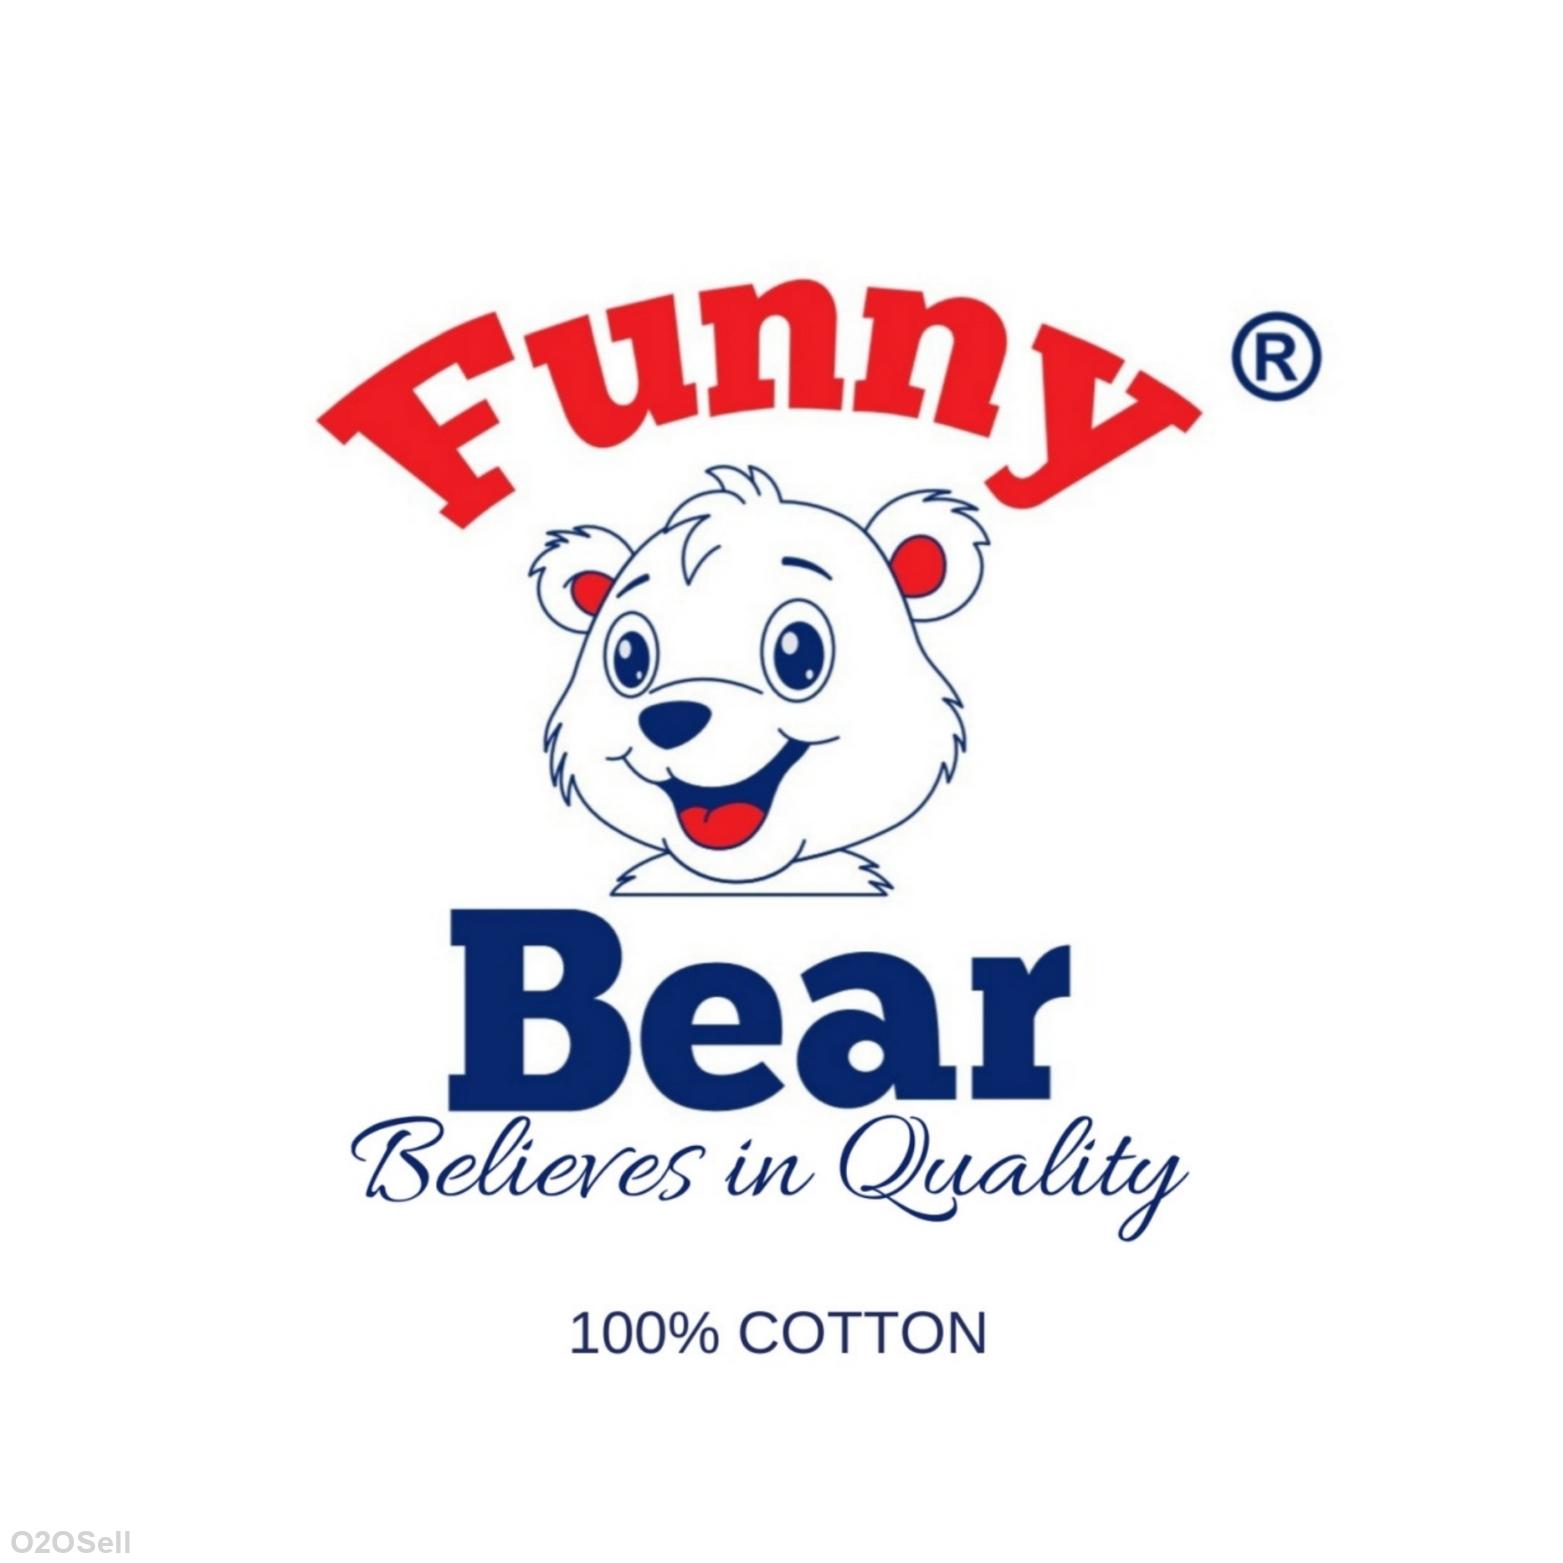 Funny Bear - Baby Clothes, Kids Clothes, Kids Wear Manufacturer in India - Cover Image